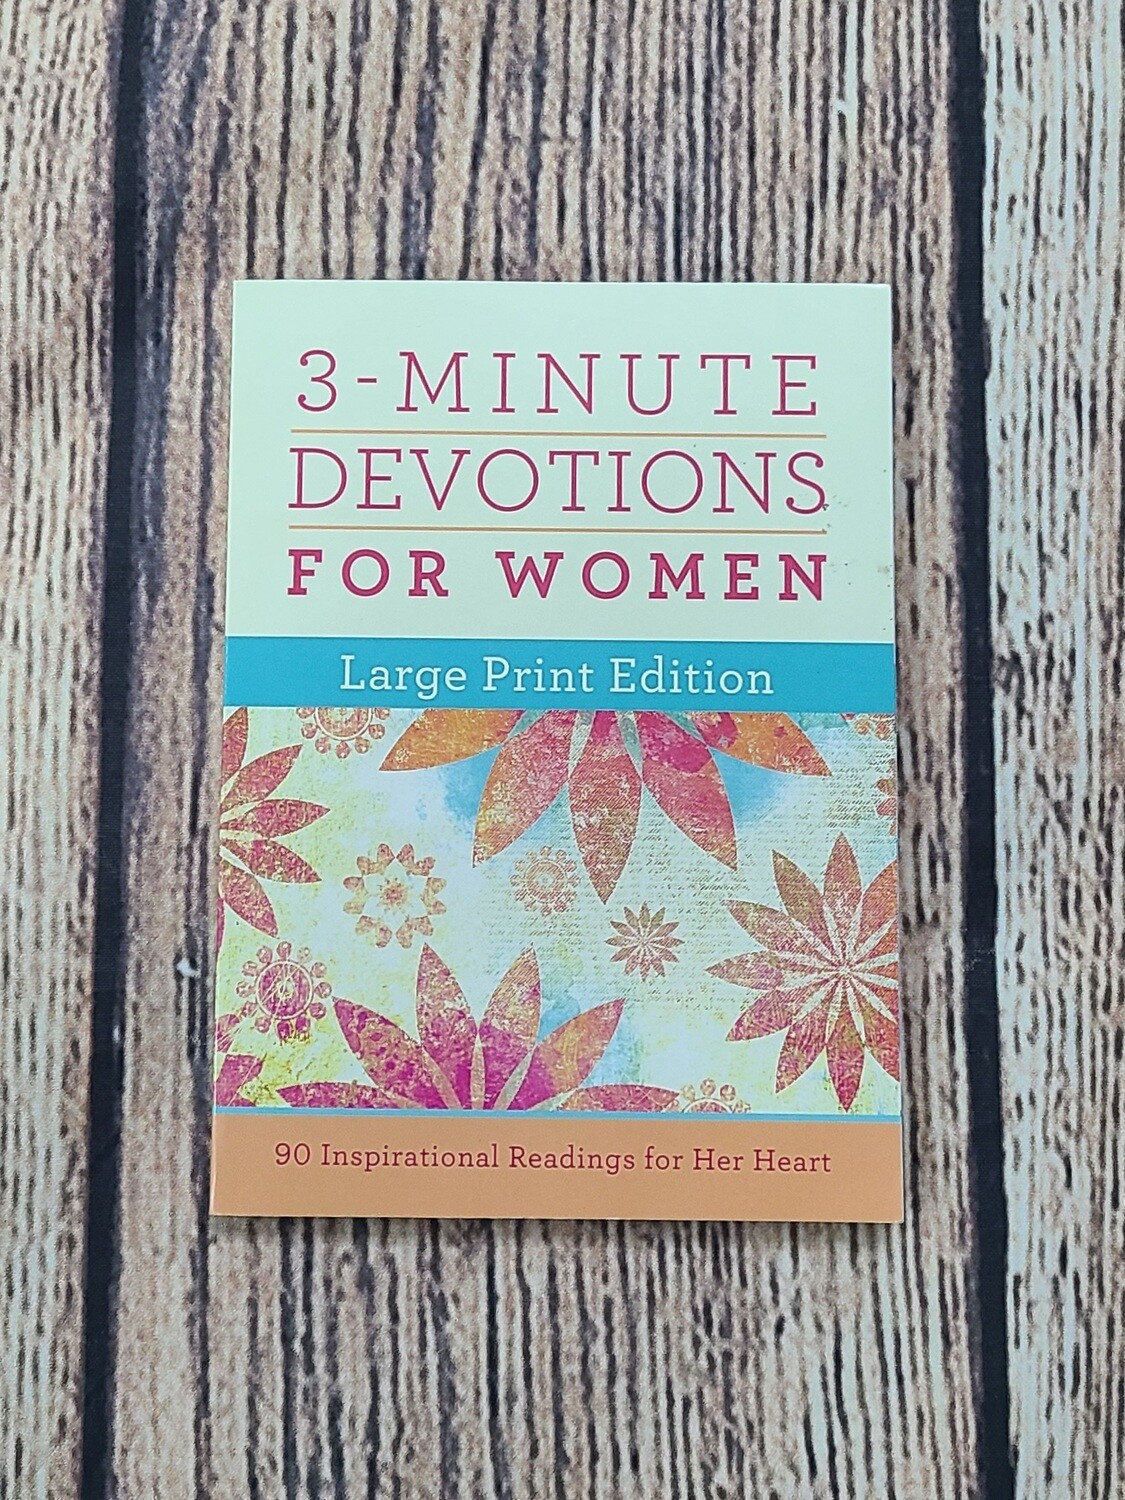 3-Minute Devotions for Women: Large Print Edition: 90 Inspirational Readings for Her Heart by Barbour Publishing - New